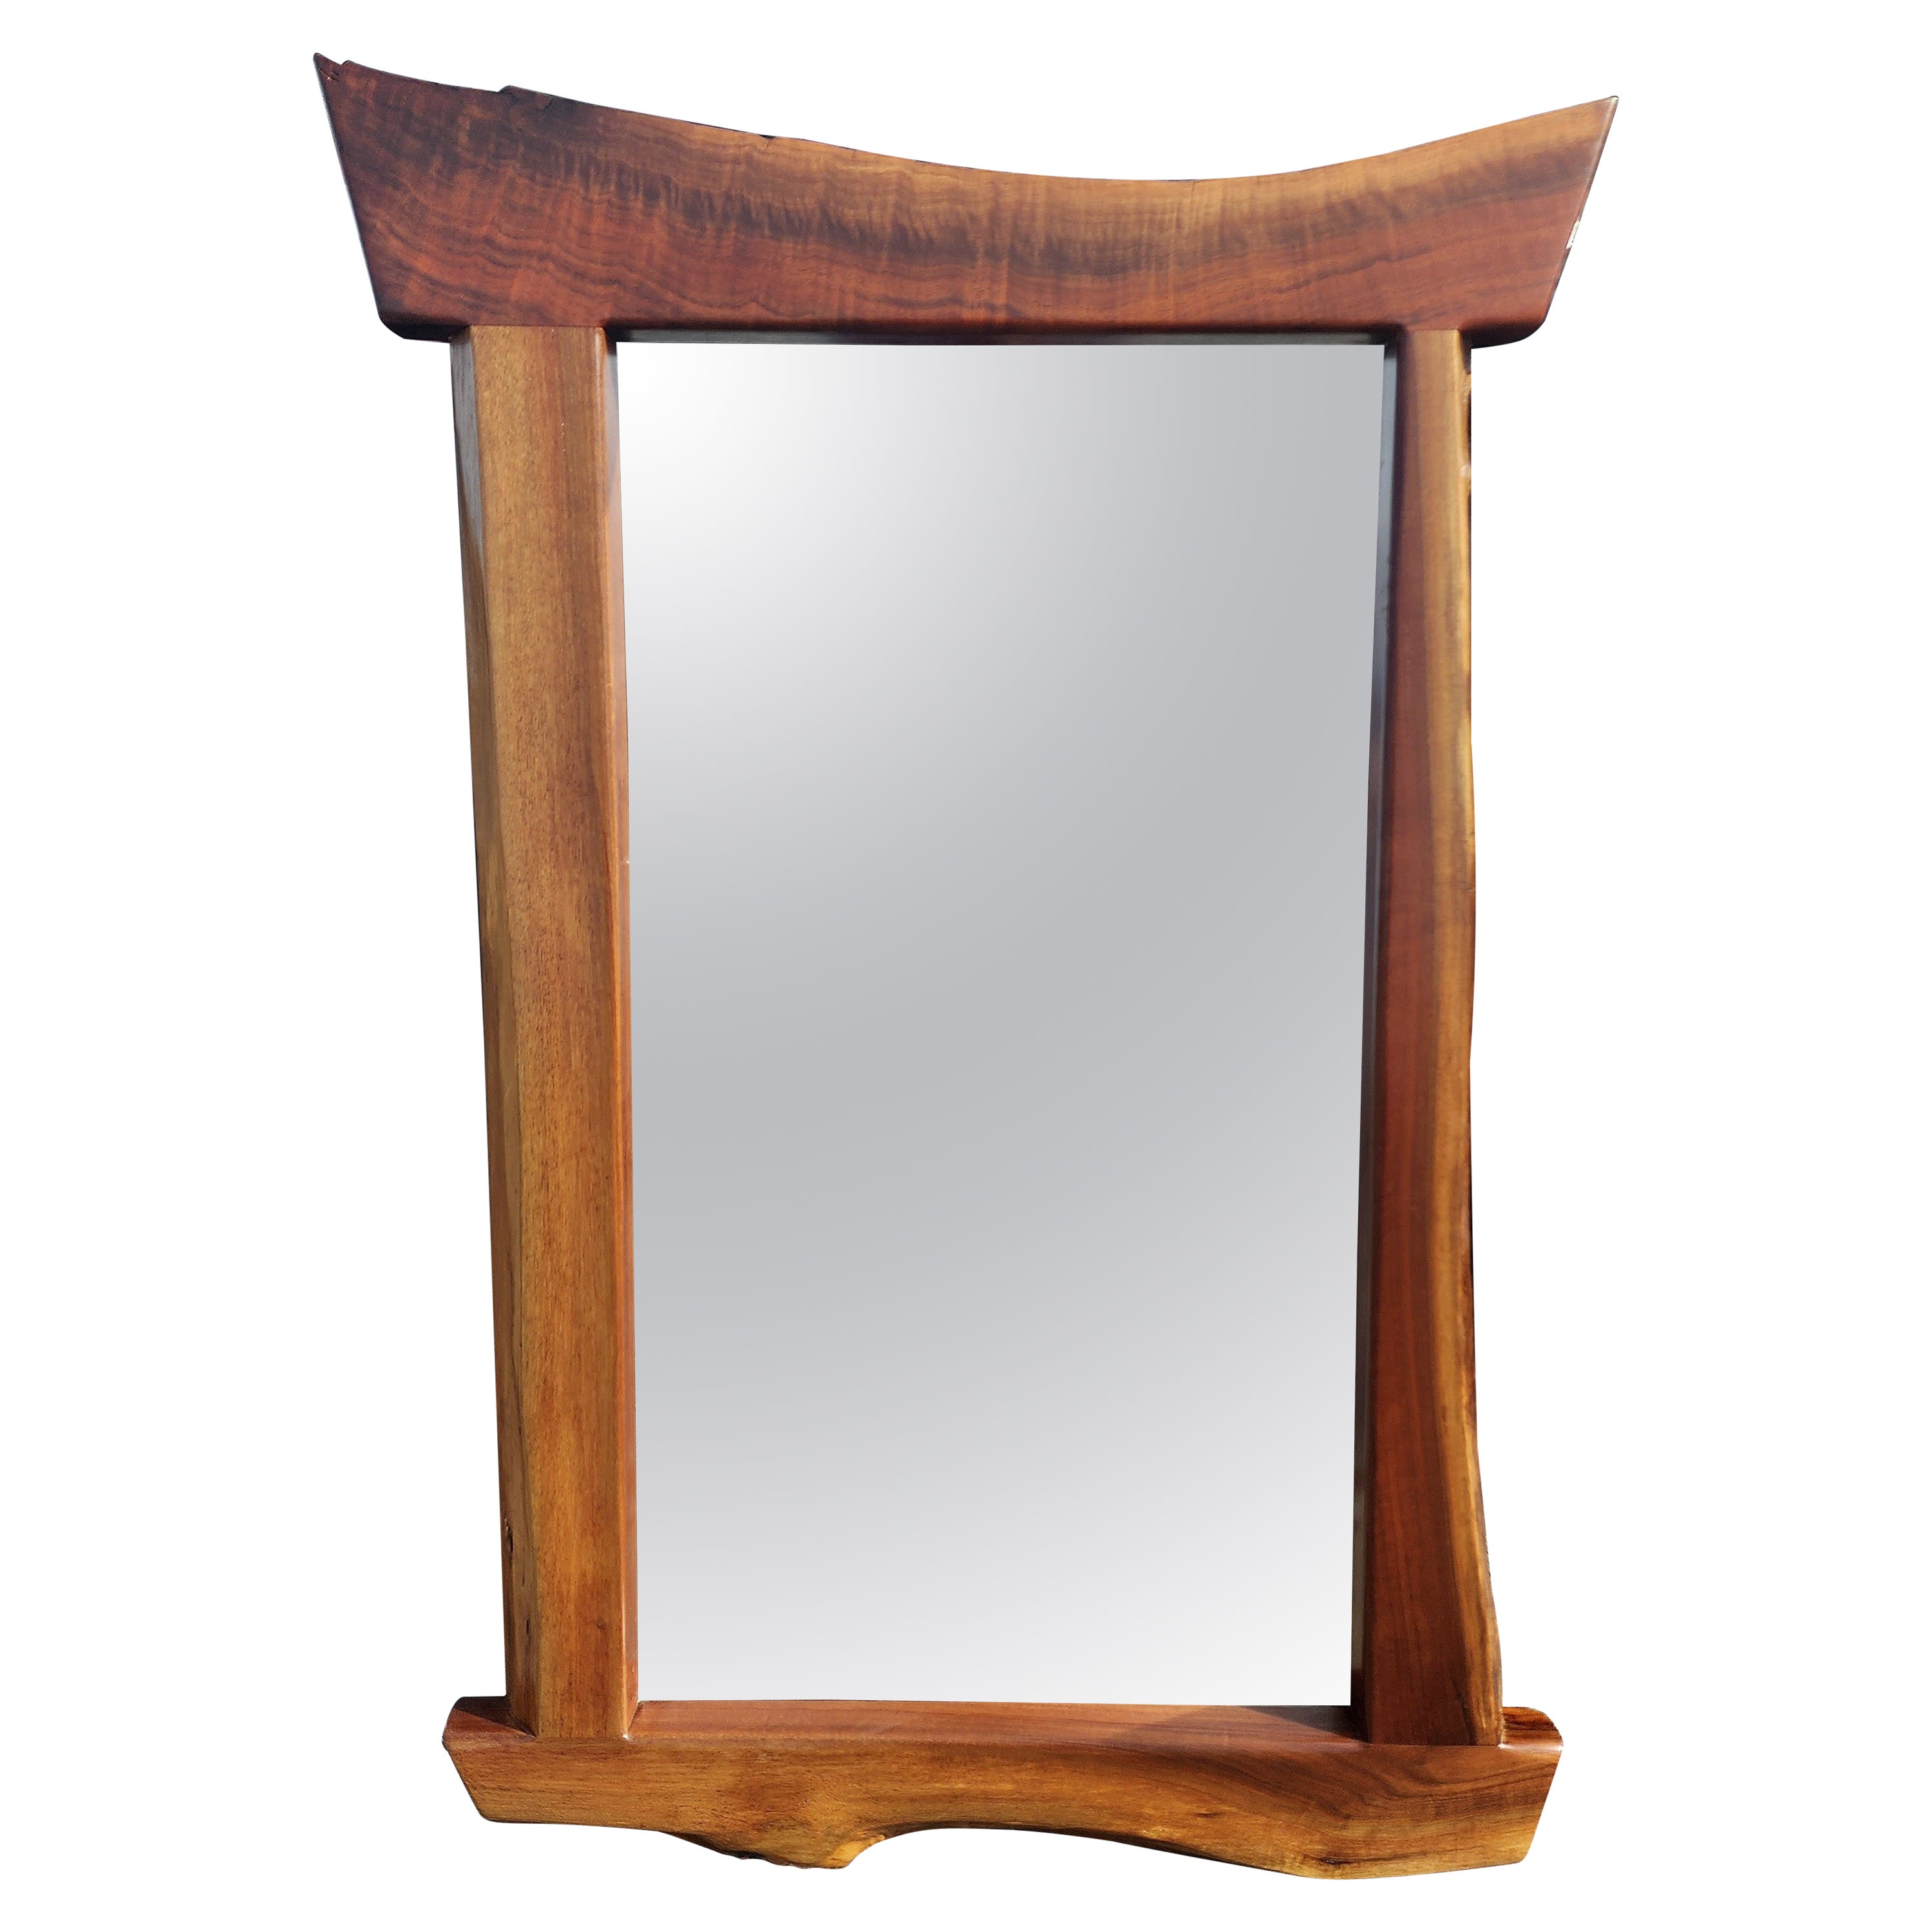 Large and beautiful live edge mirror. Made with California redwood, the patina is warm and glowing, and the size makes it a statement piece.
This piece is beautiful from all angles and can be used with any interior.
Please contact me with the